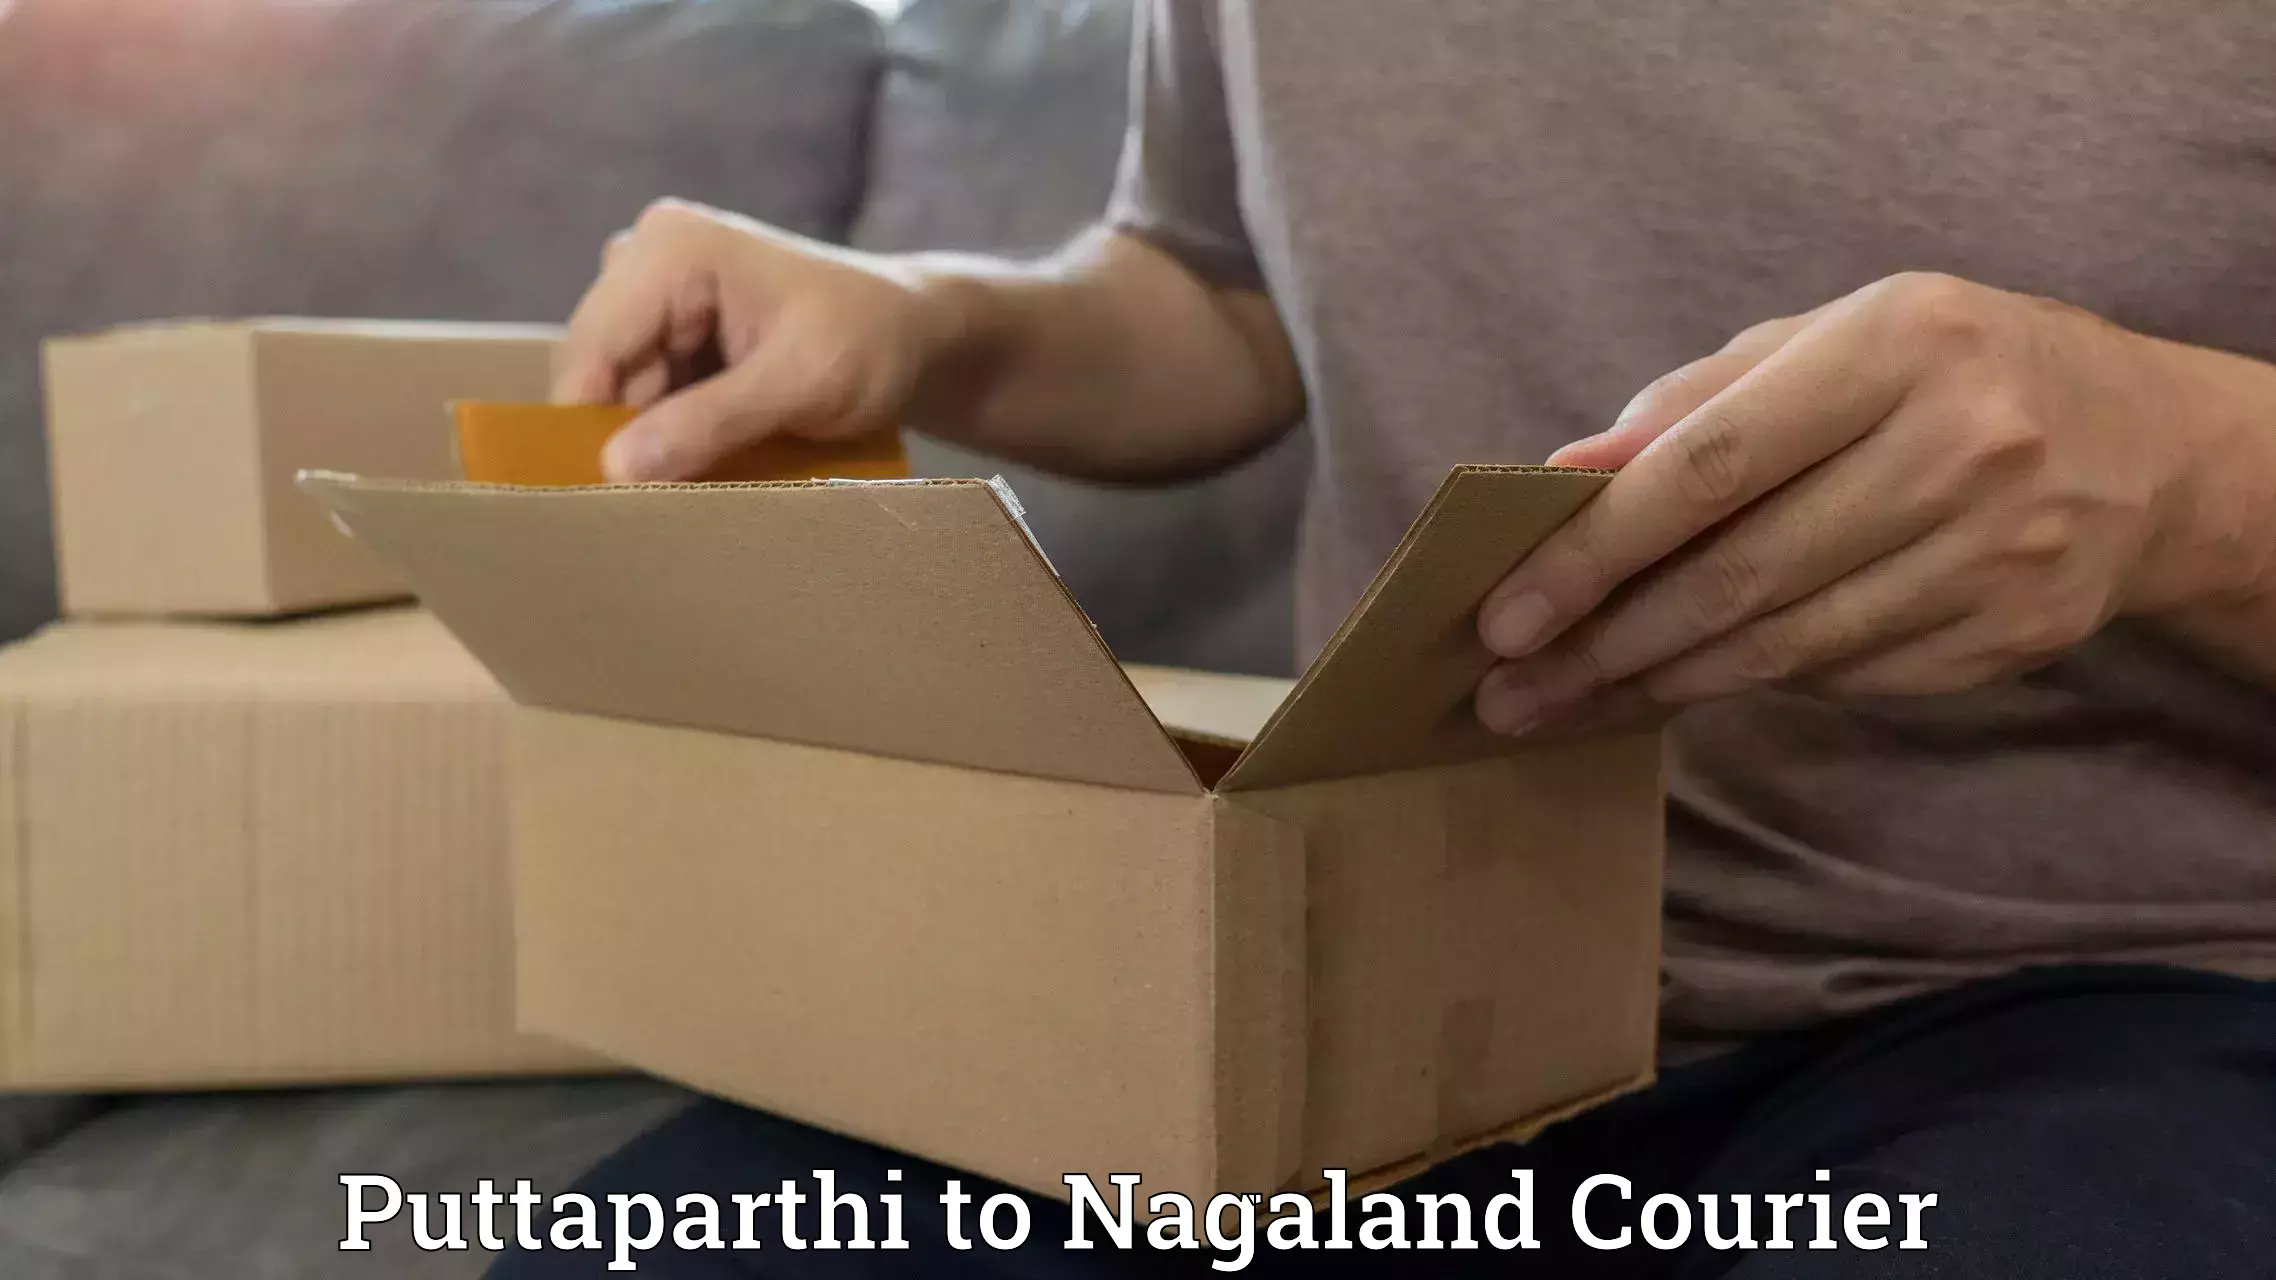 Global courier networks Puttaparthi to Nagaland